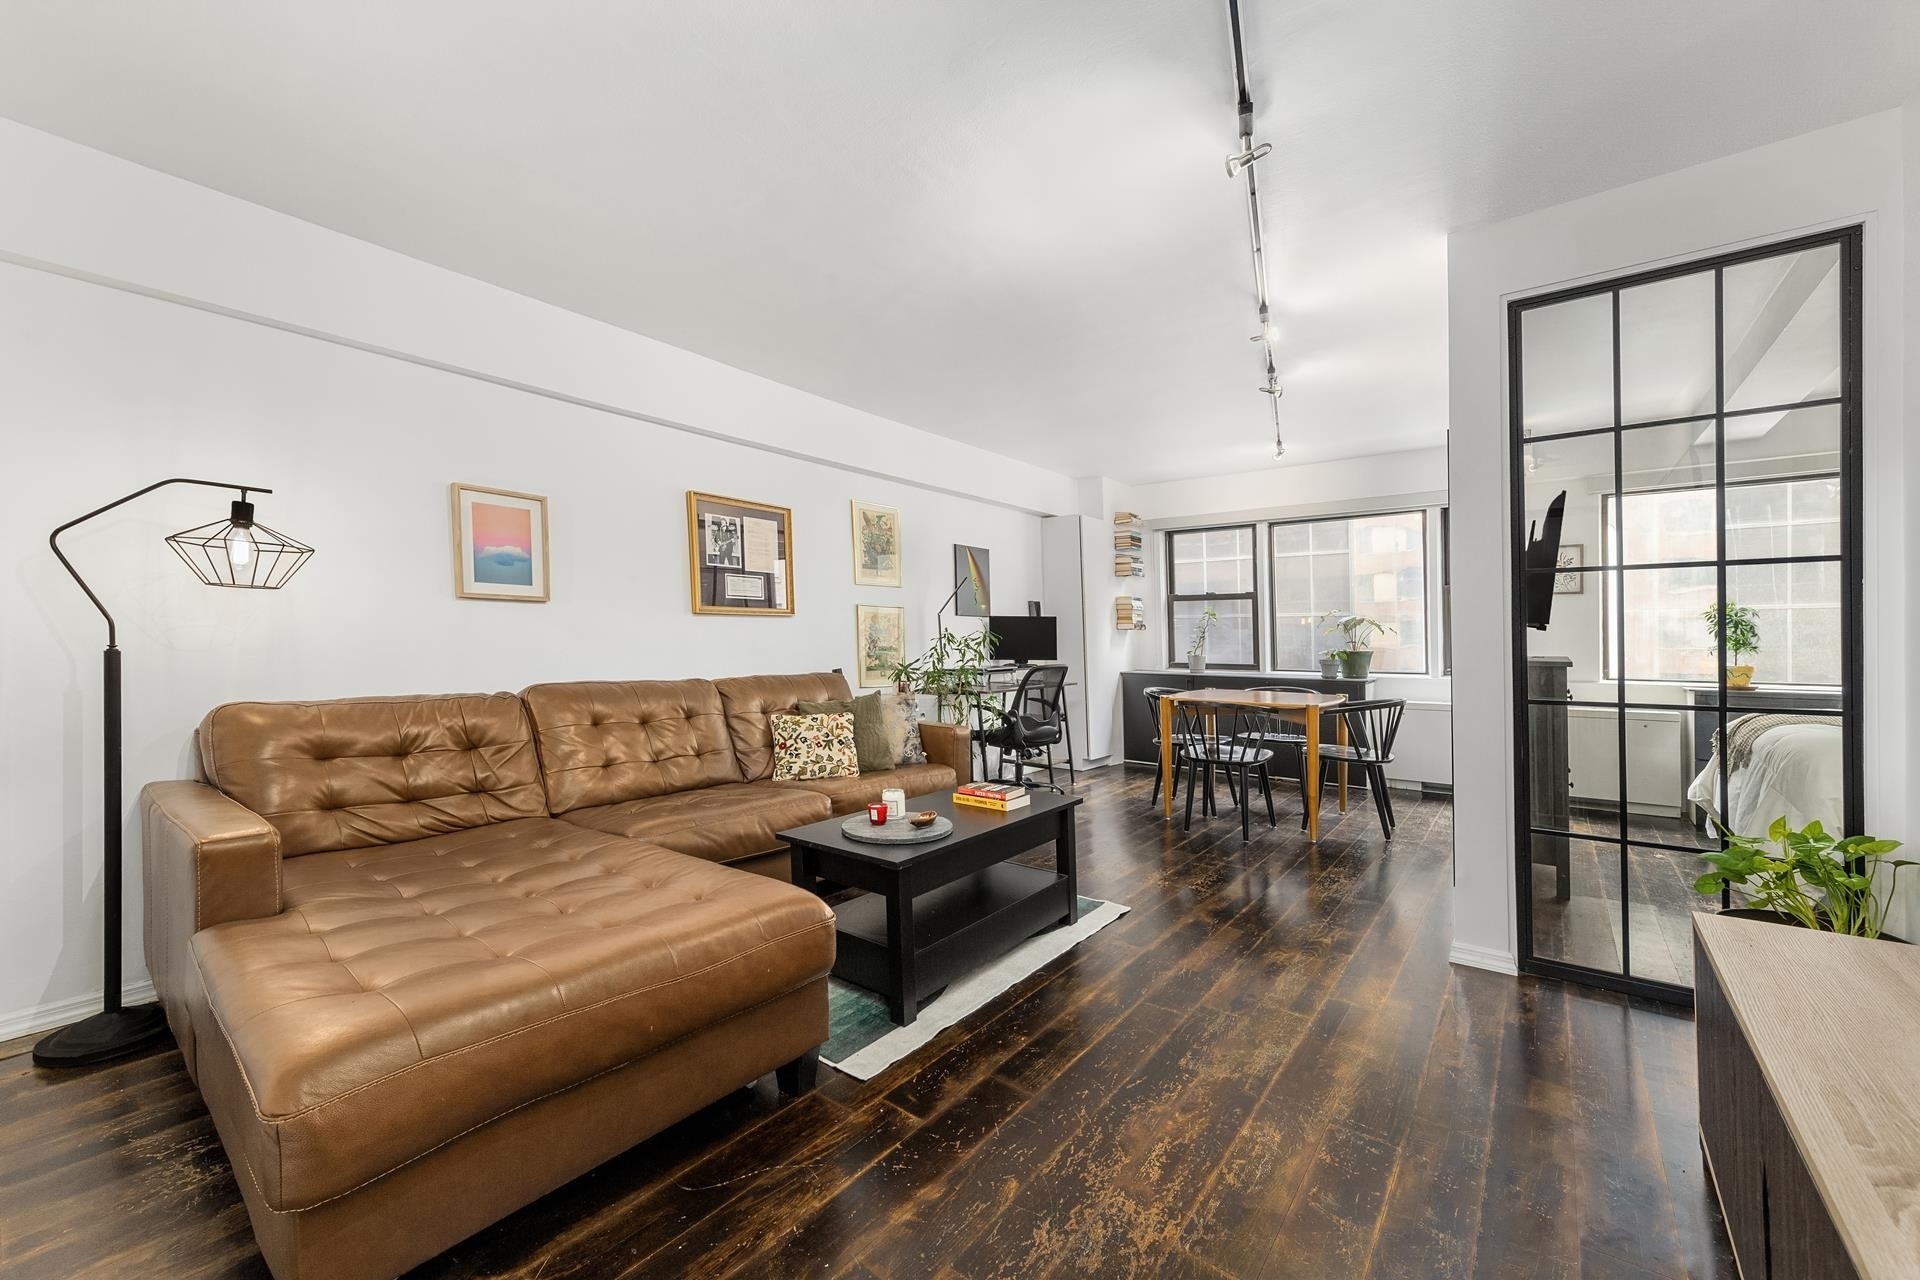 Co-op Properties for Sale at 220 E 67TH ST, 6F Lenox Hill, New York, NY 10065